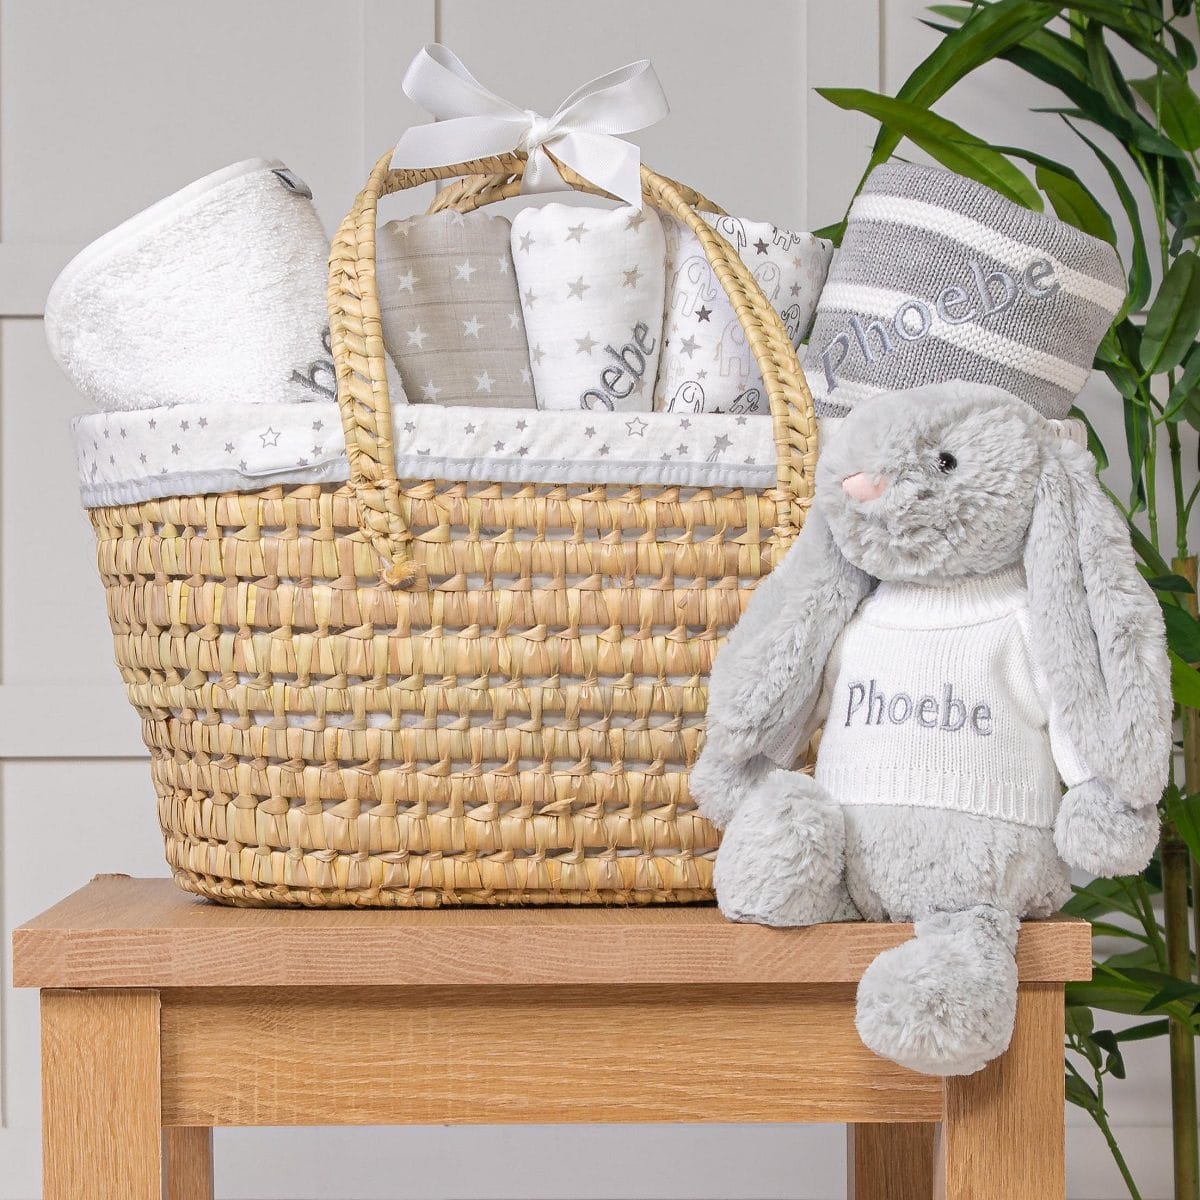 Personalised white and grey baby gift basket with grey bunny soft toy